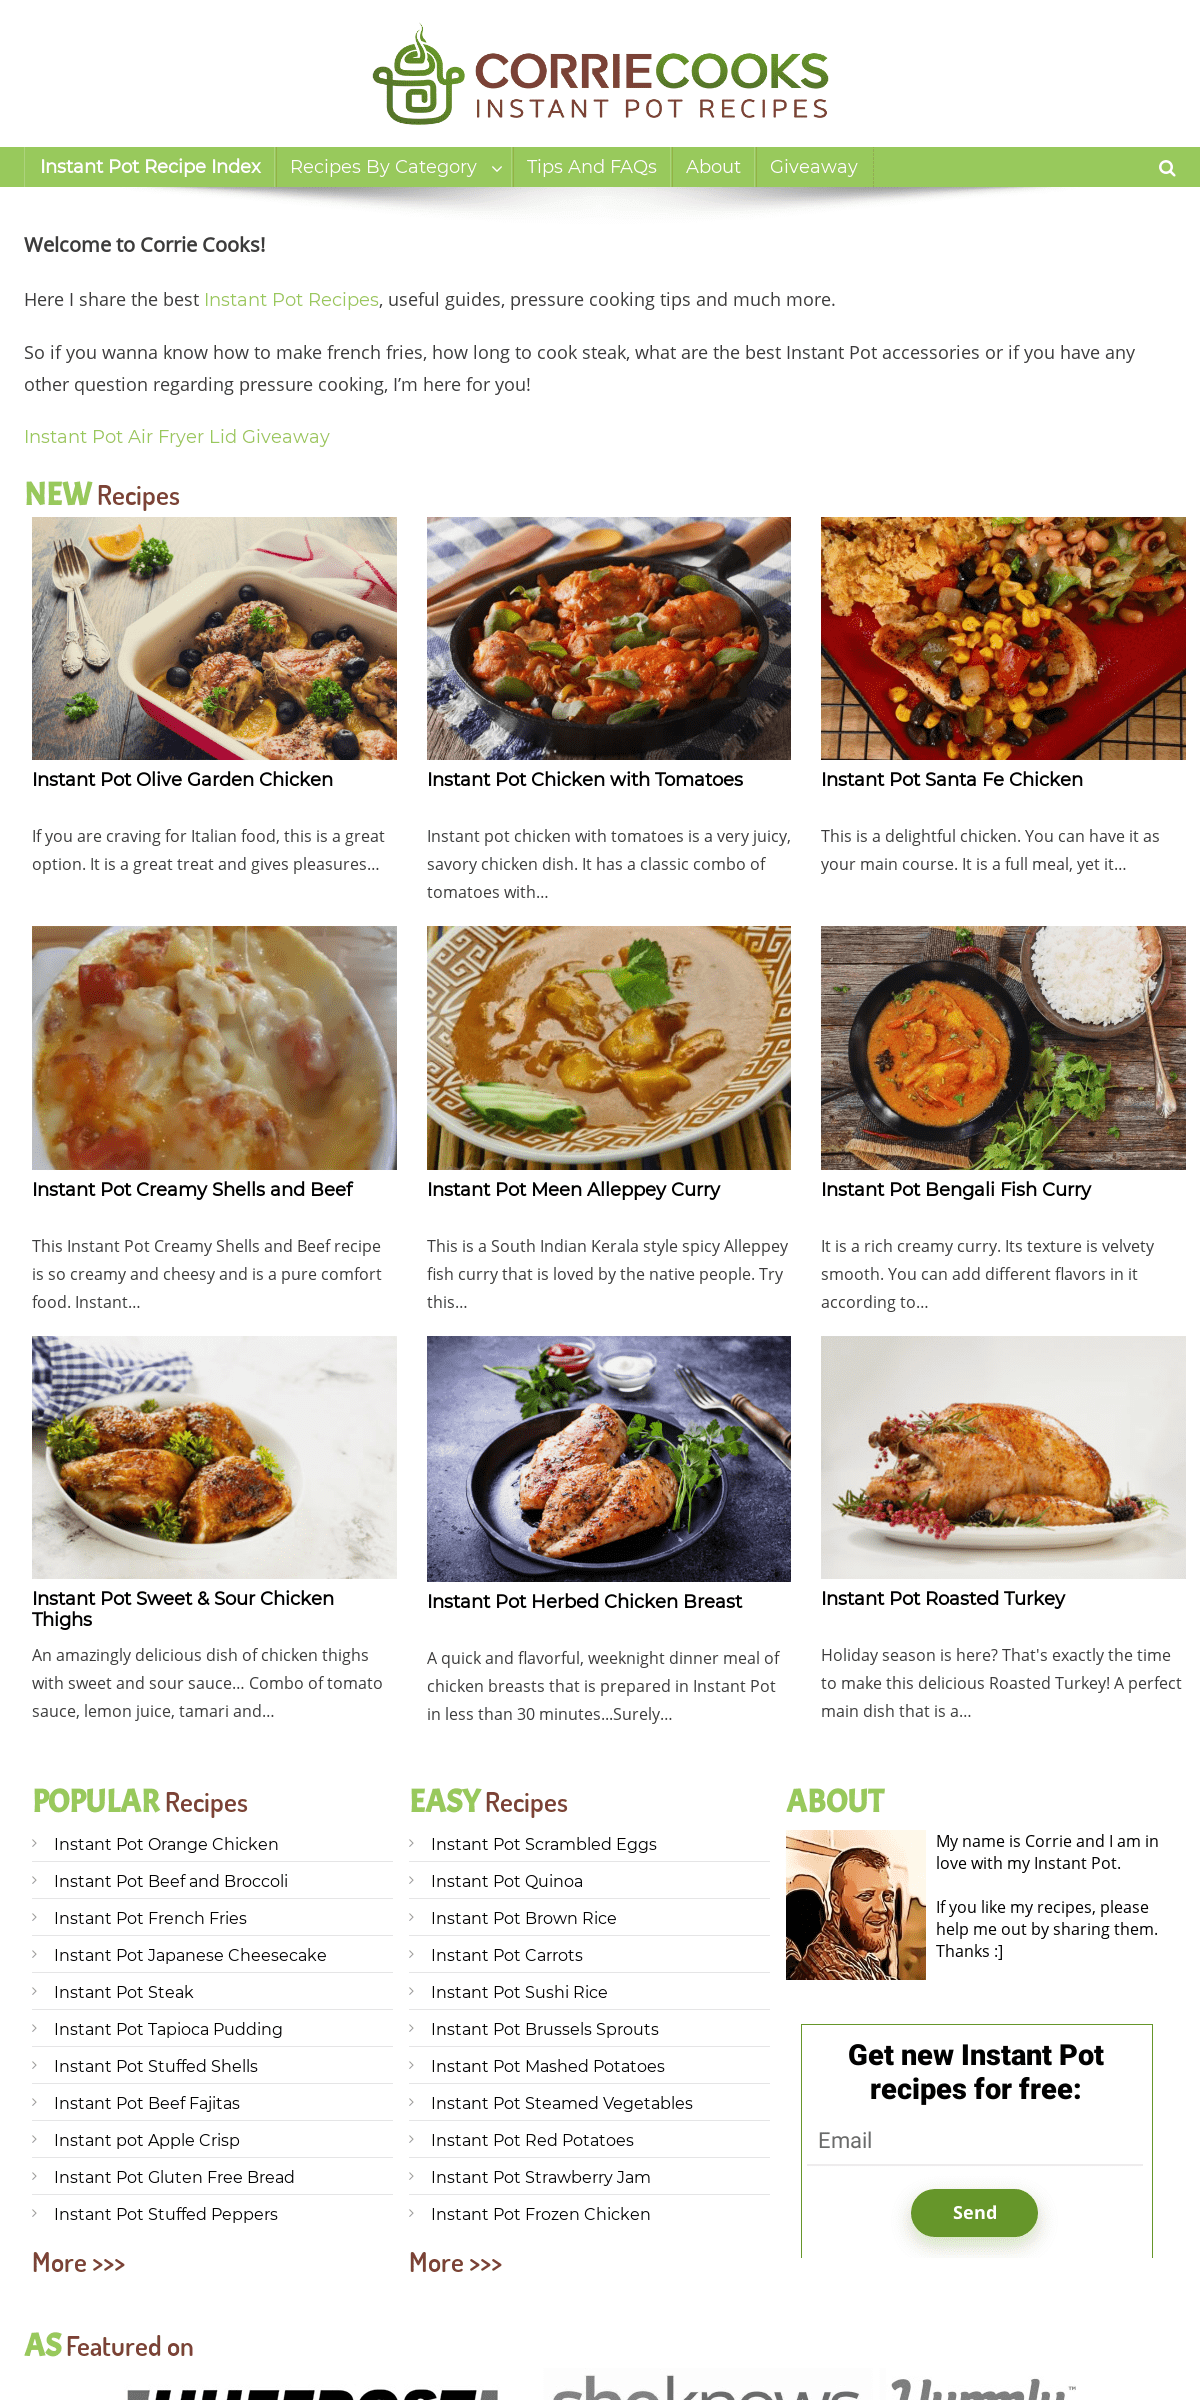 A complete backup of corriecooks.com